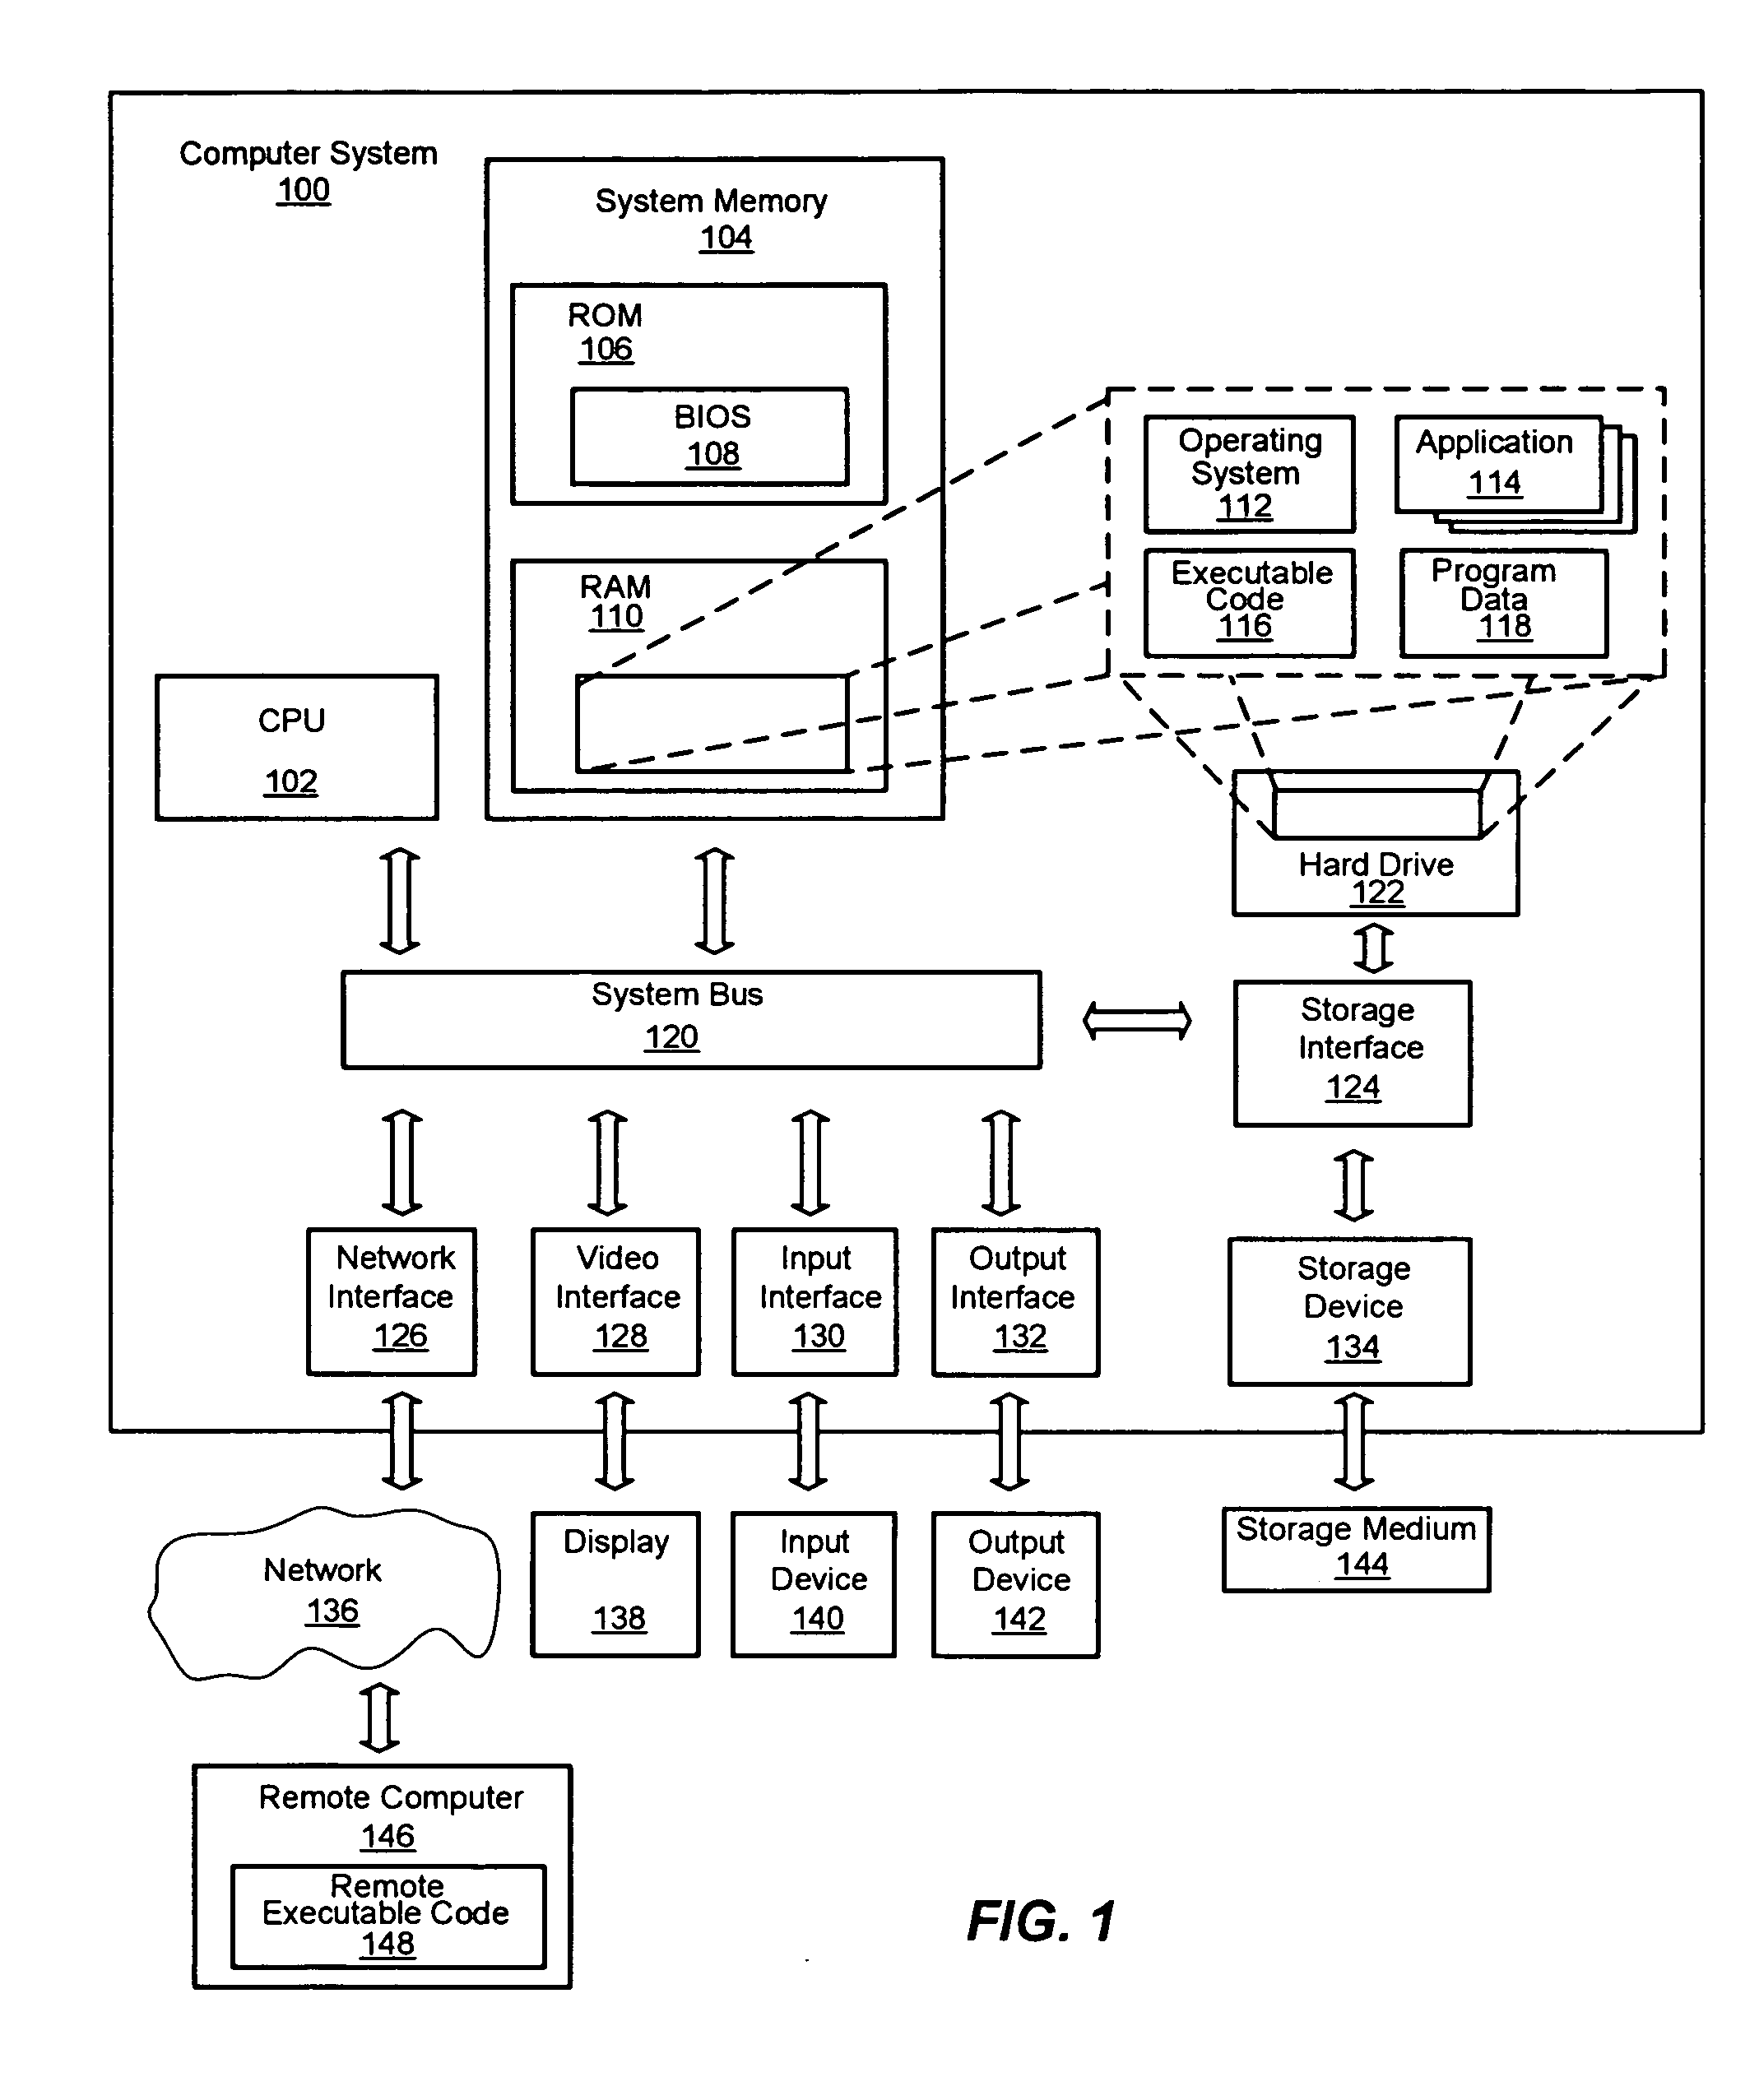 System and method for recovery from failure of a storage server in a distributed column chunk data store